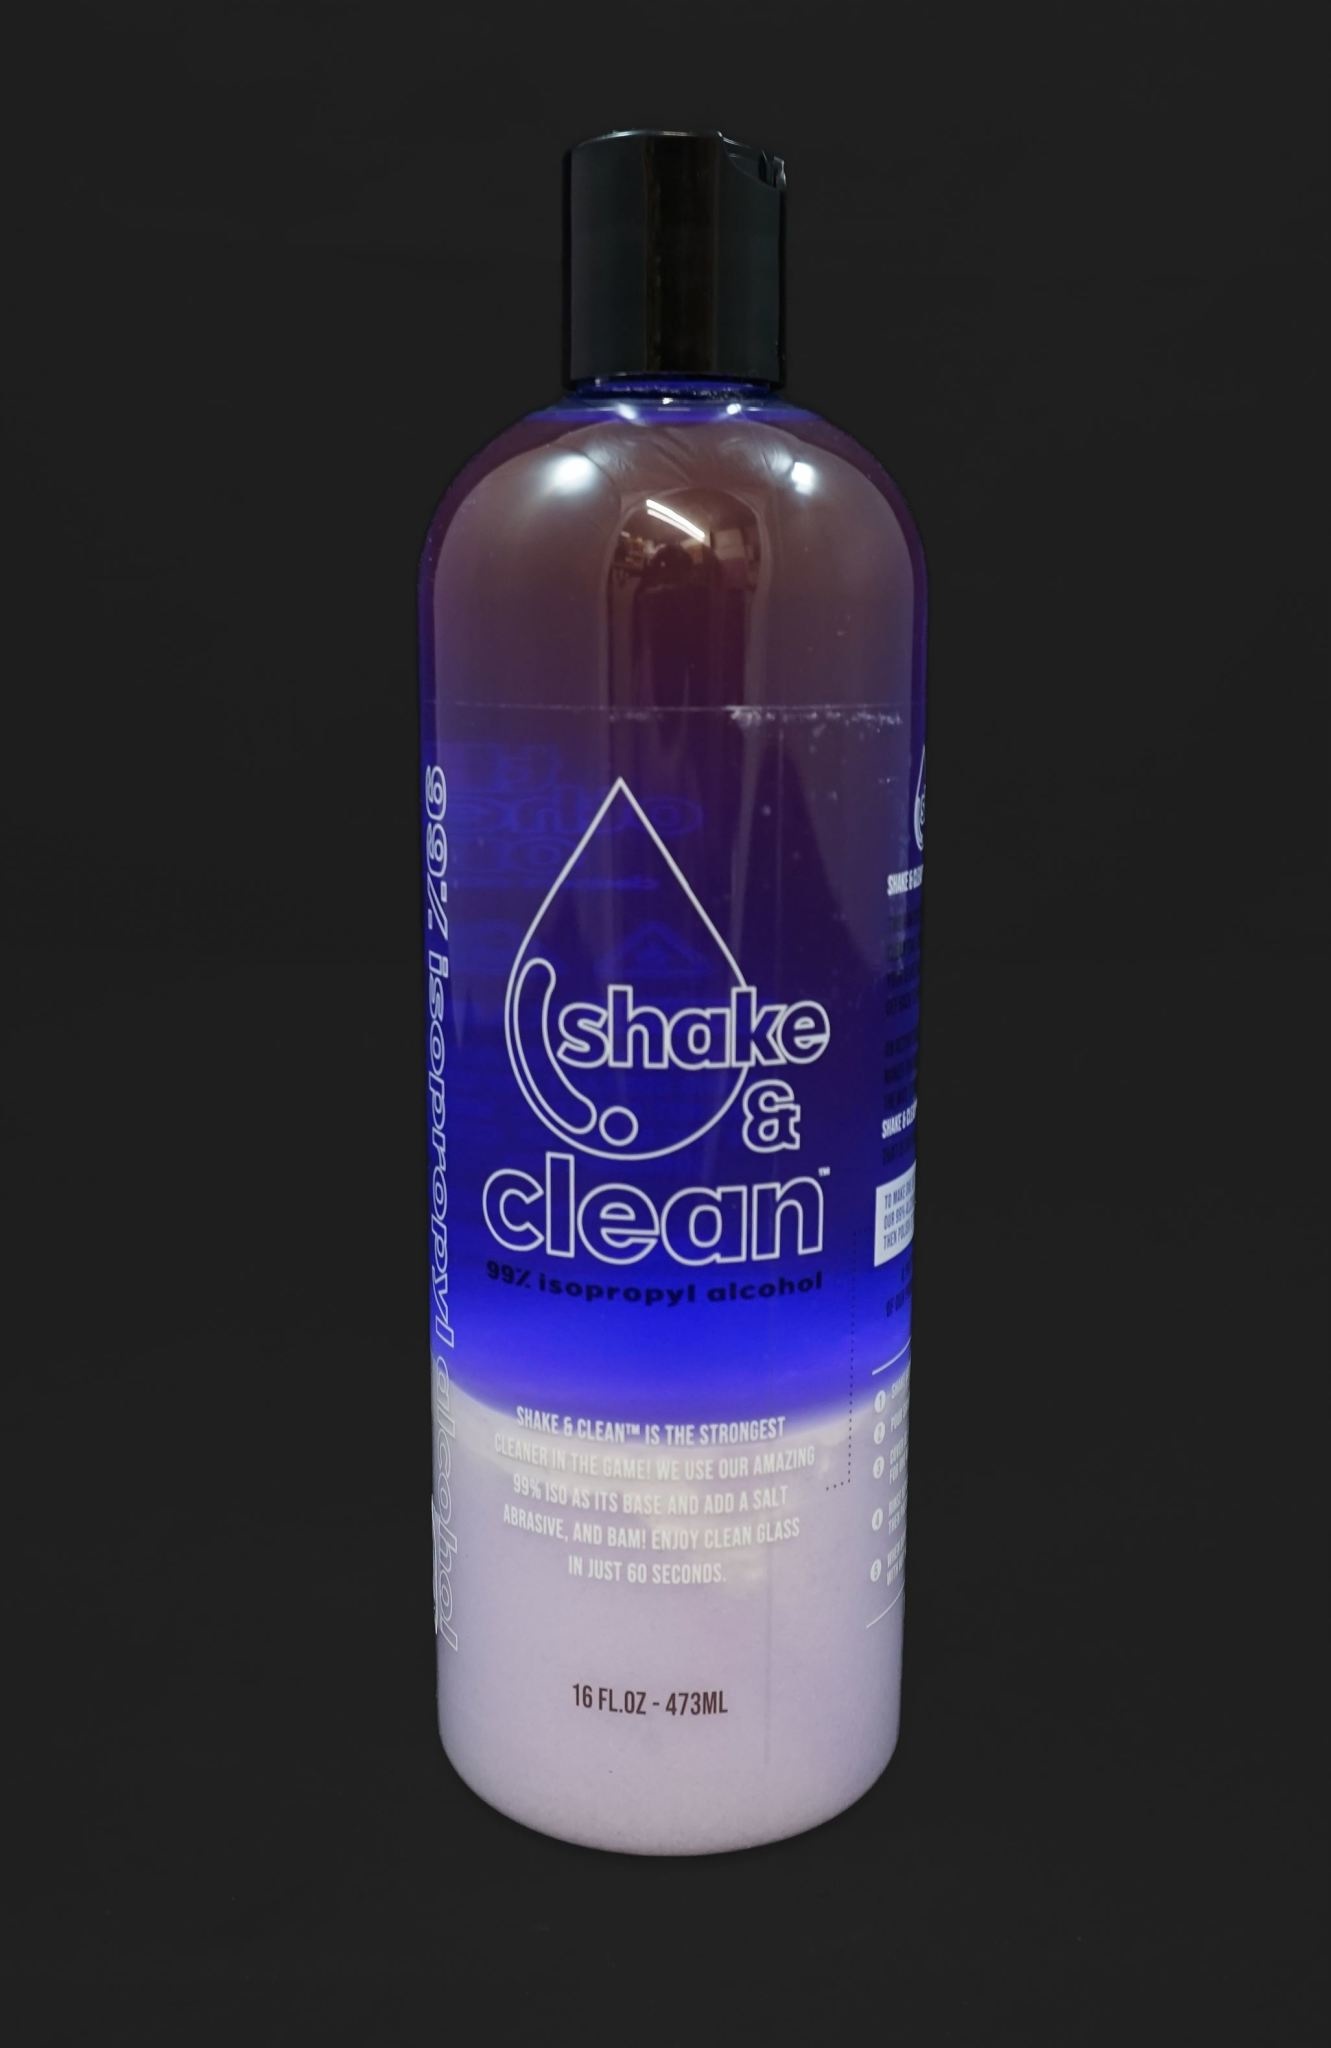 Alcohol Cleaner 